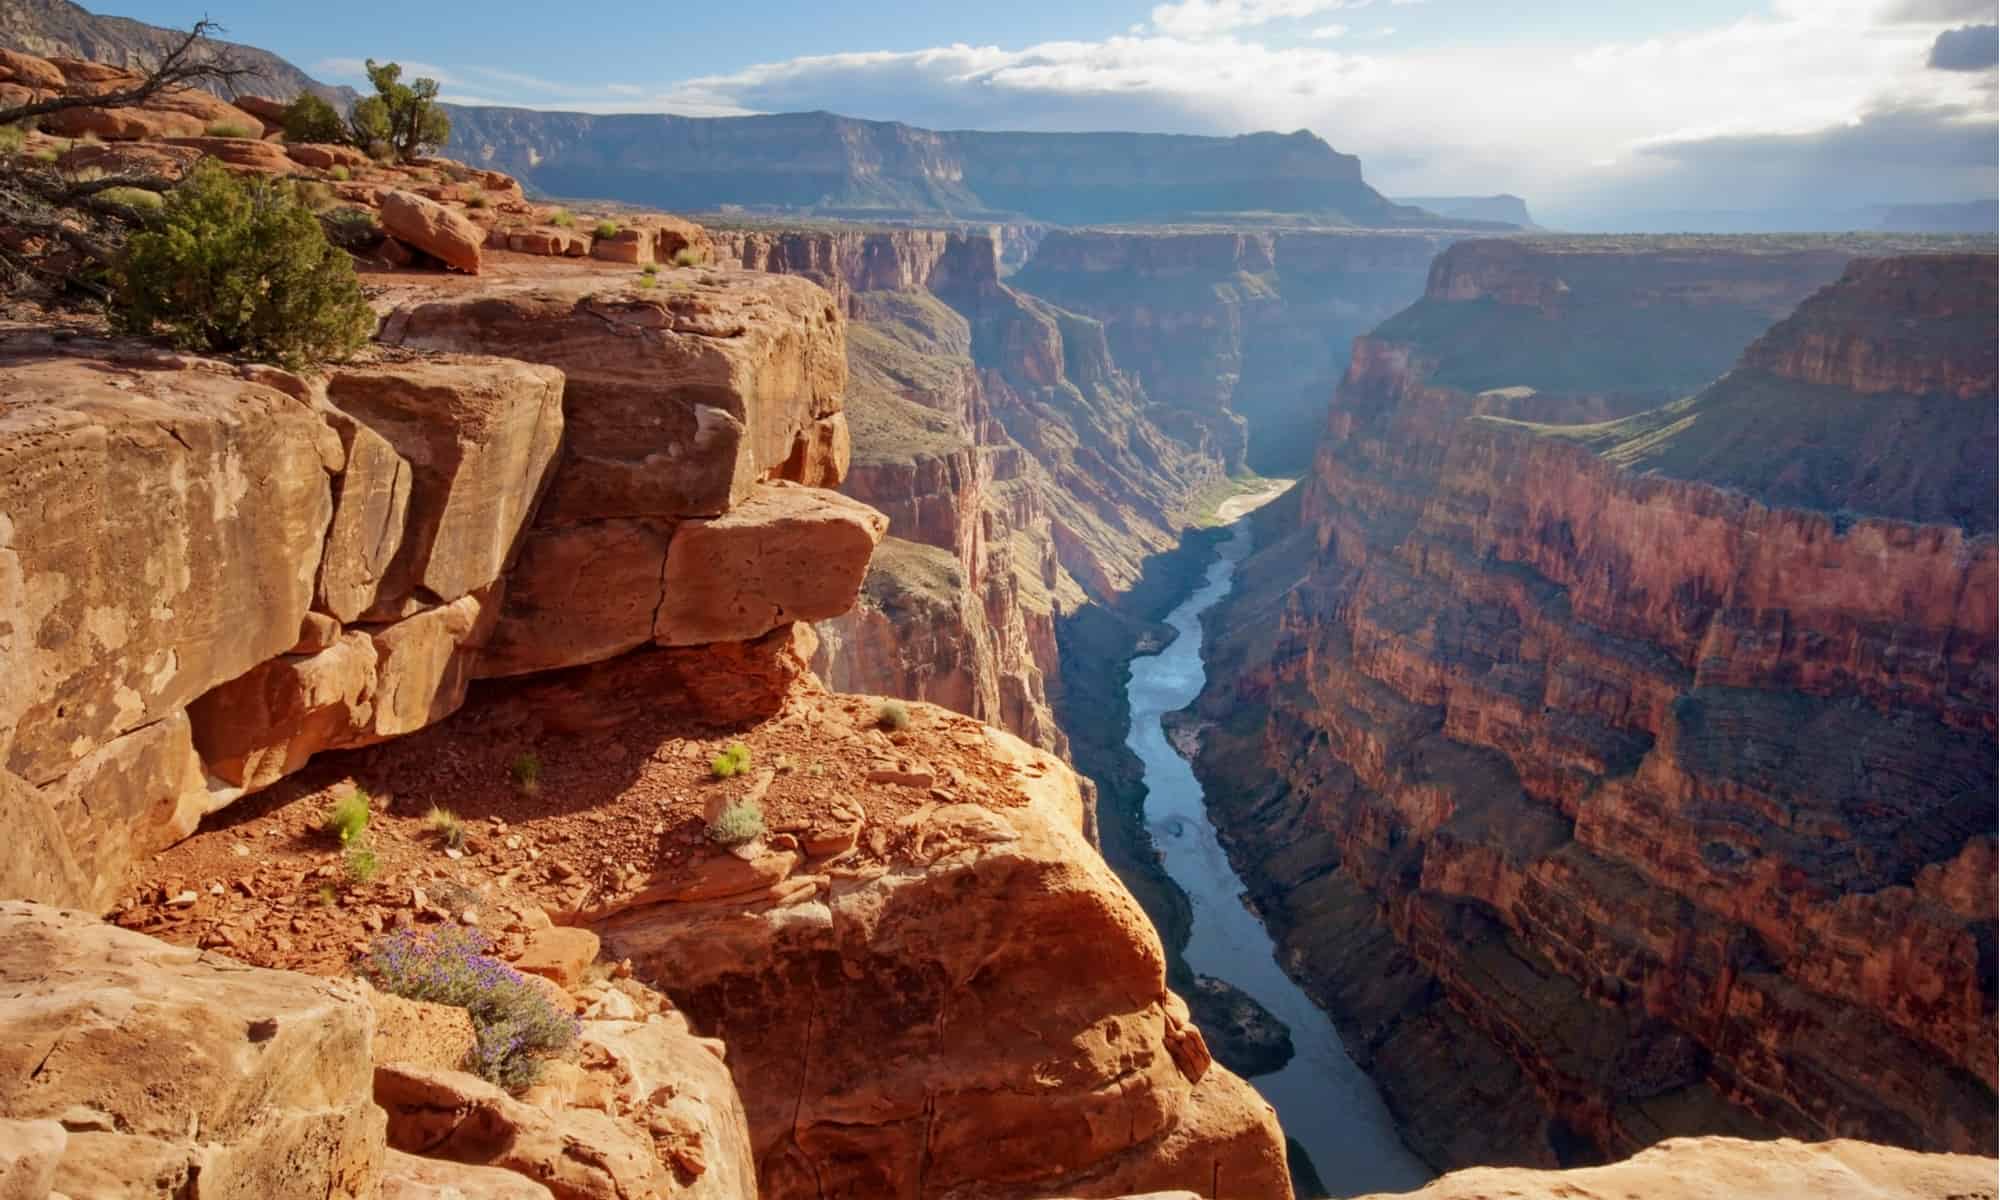 How deep was the water in the Grand Canyon?